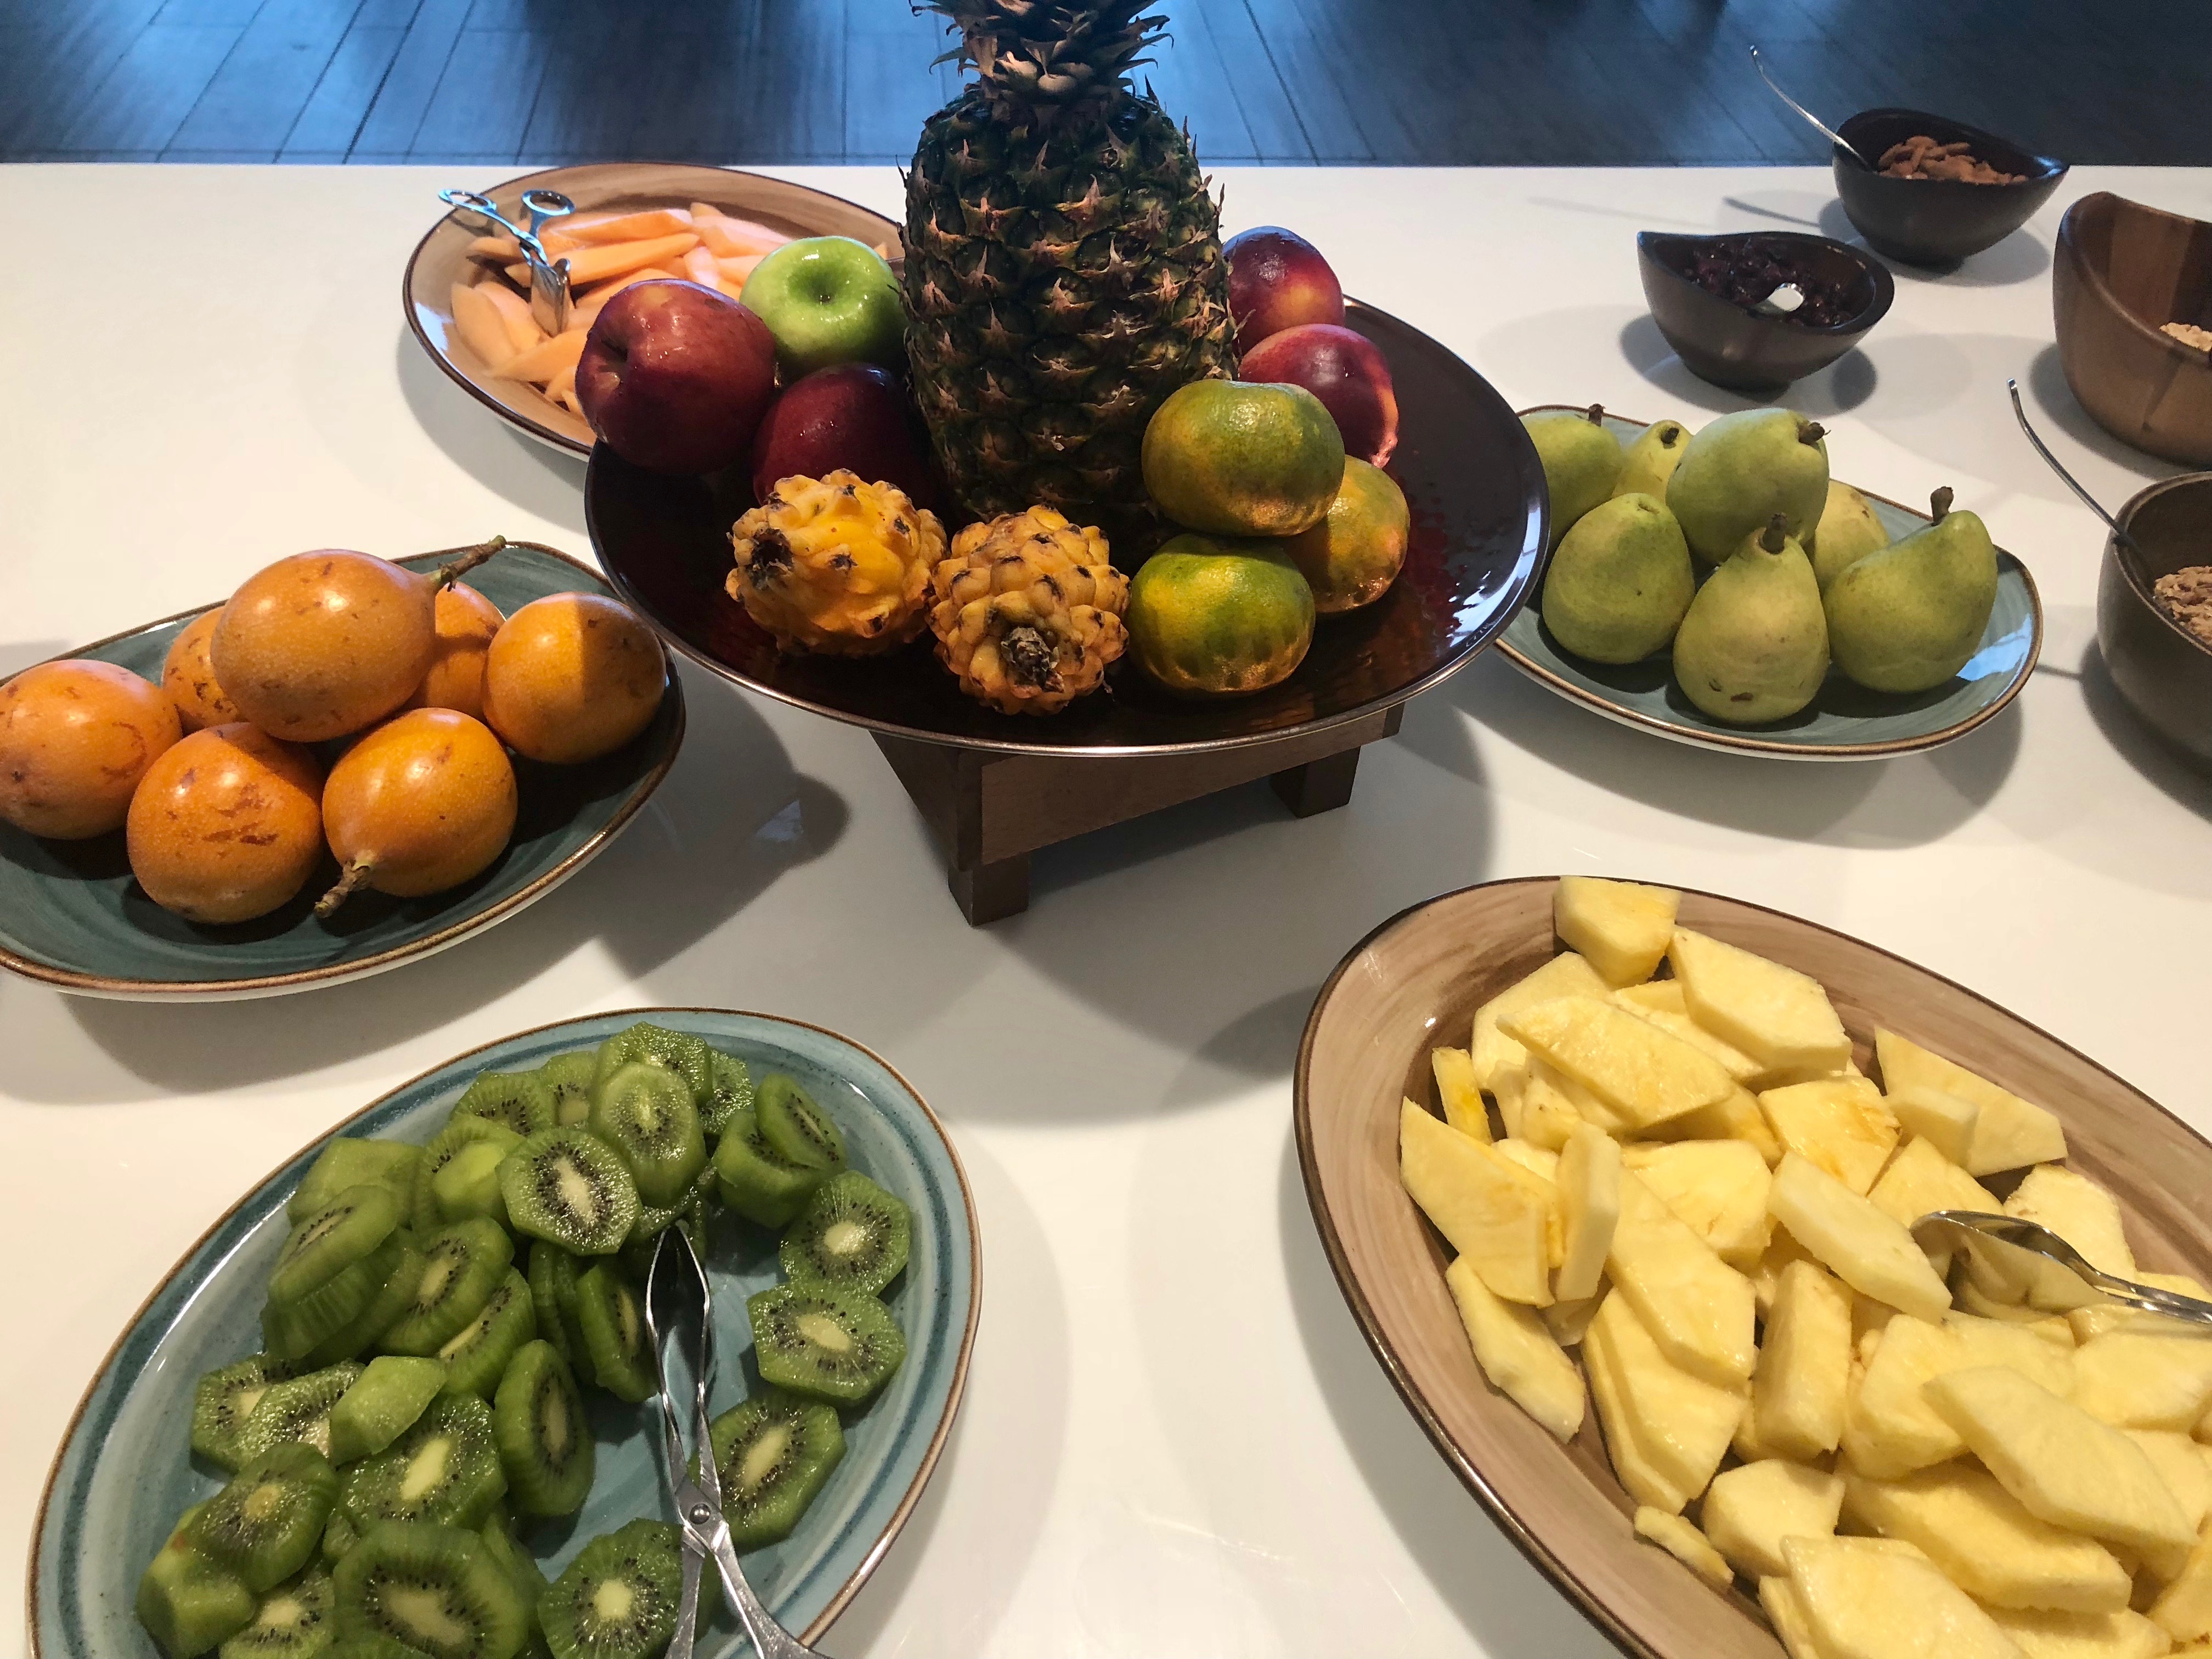 a table with plates of fruit